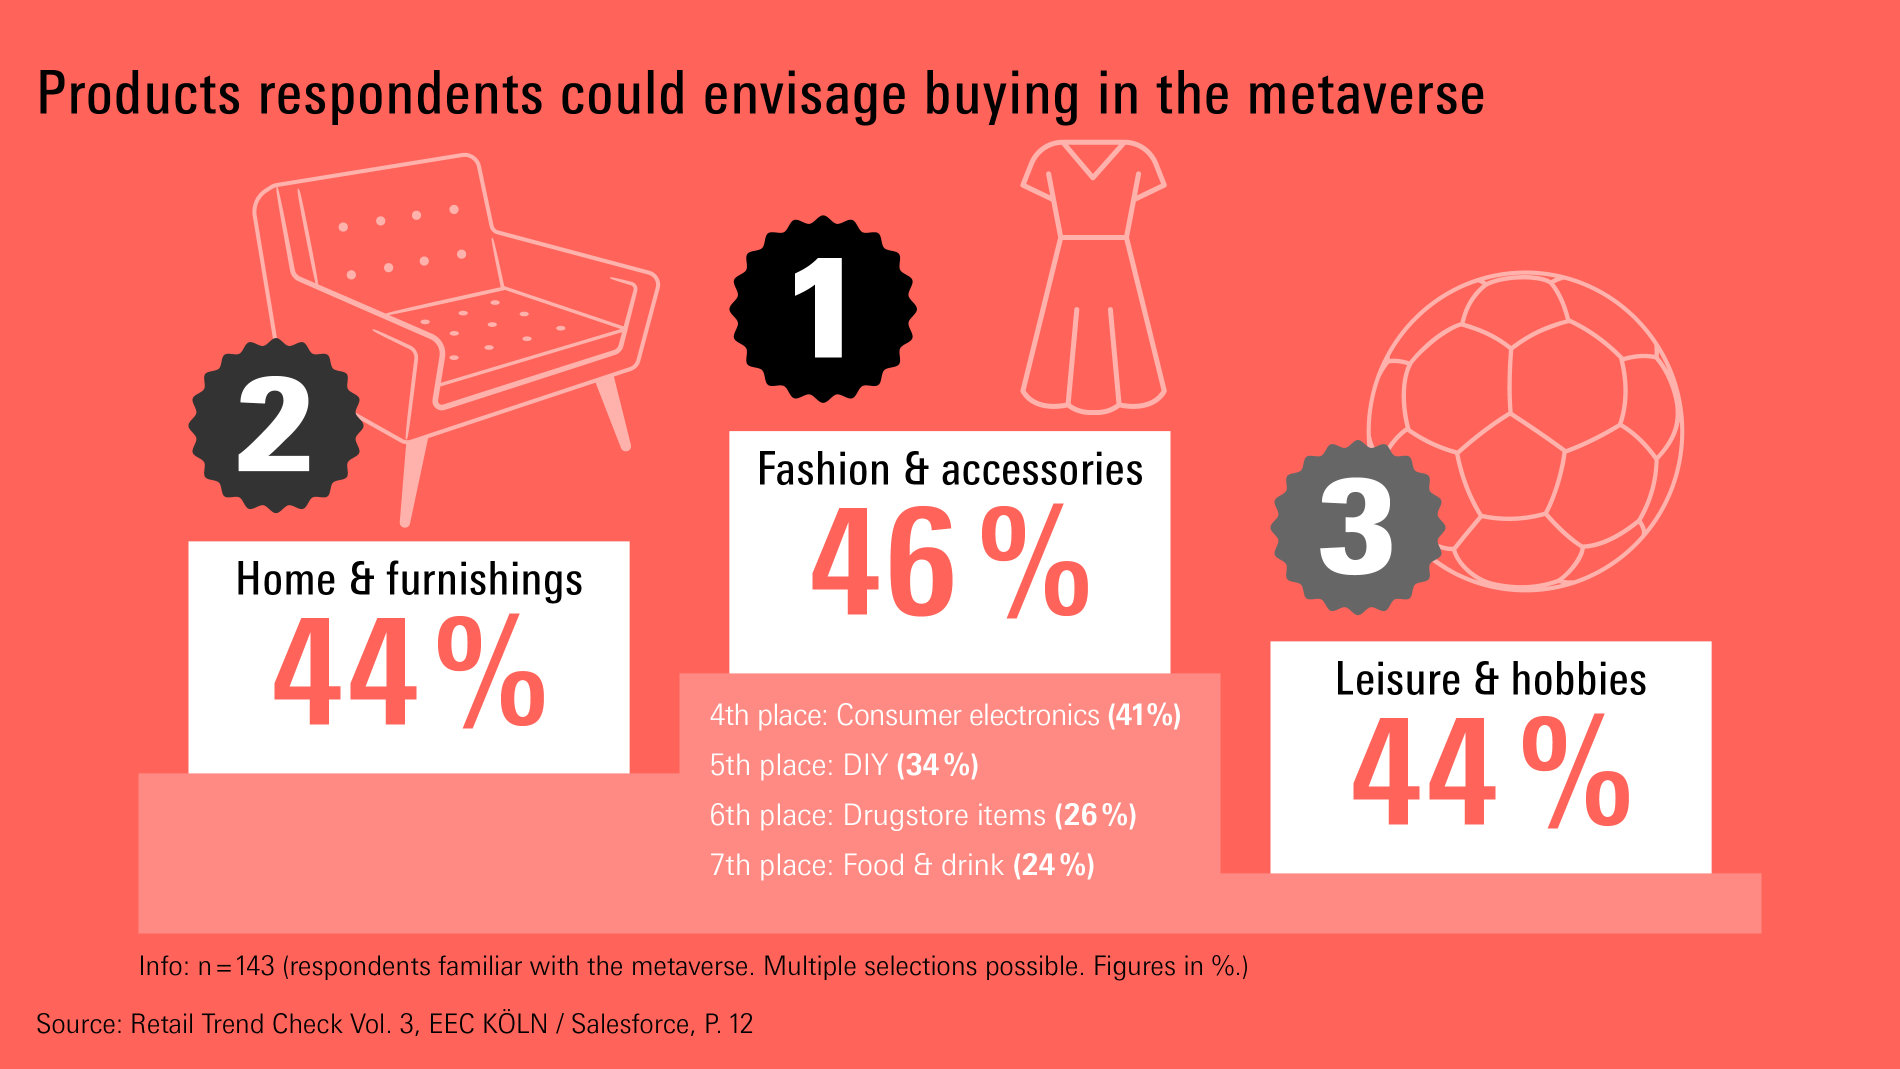 Grafic: Products respondents could envisage buying in the metaverse